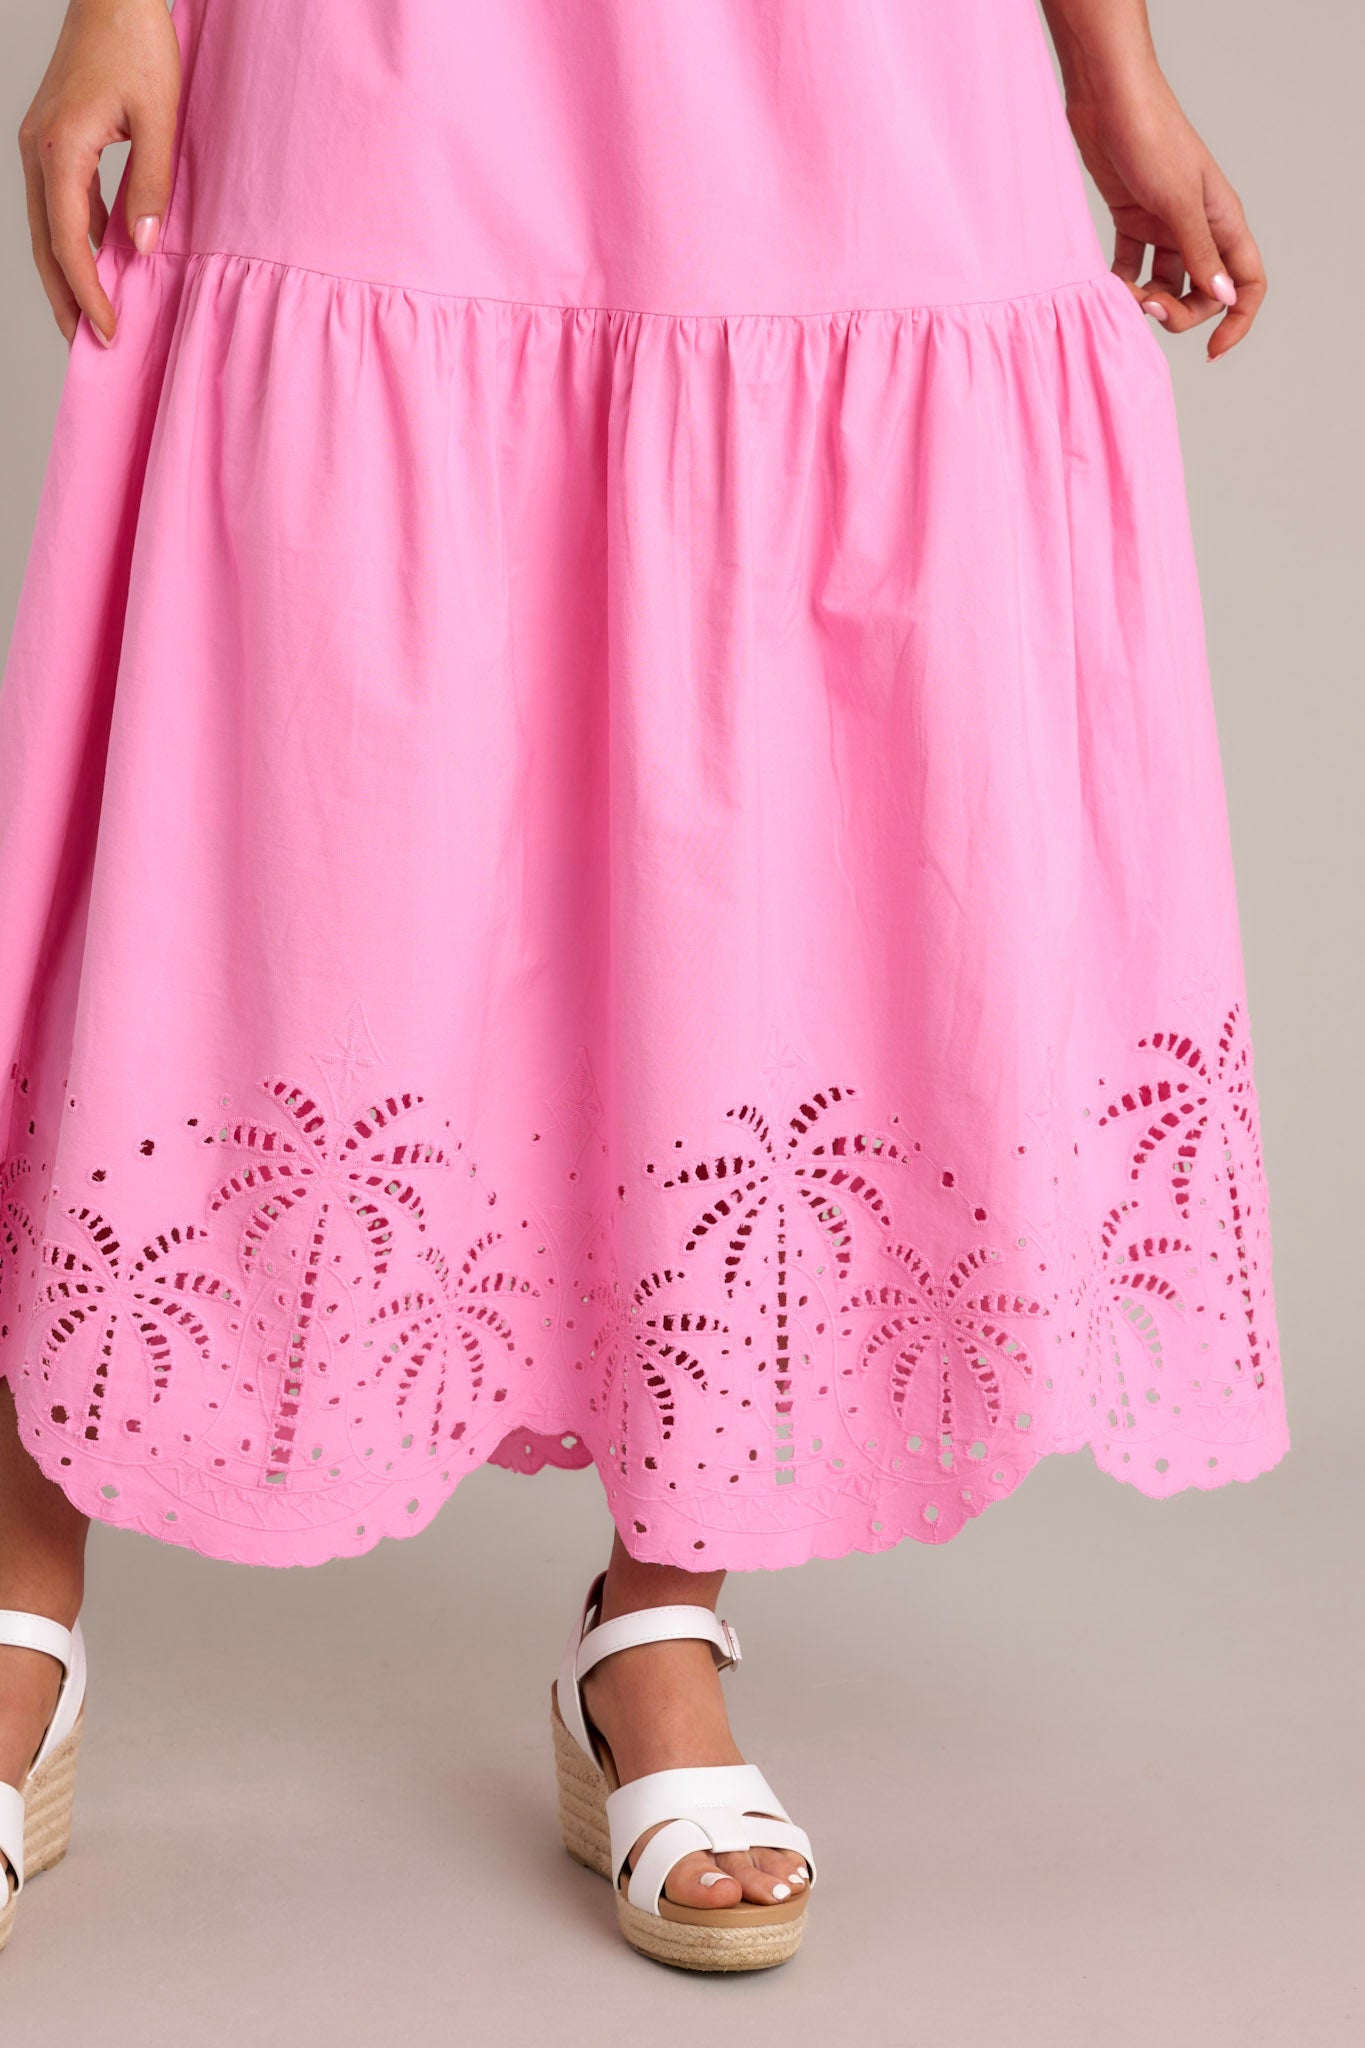 Close-up of the pink midi dress showing the intricate palm eyelet detailing